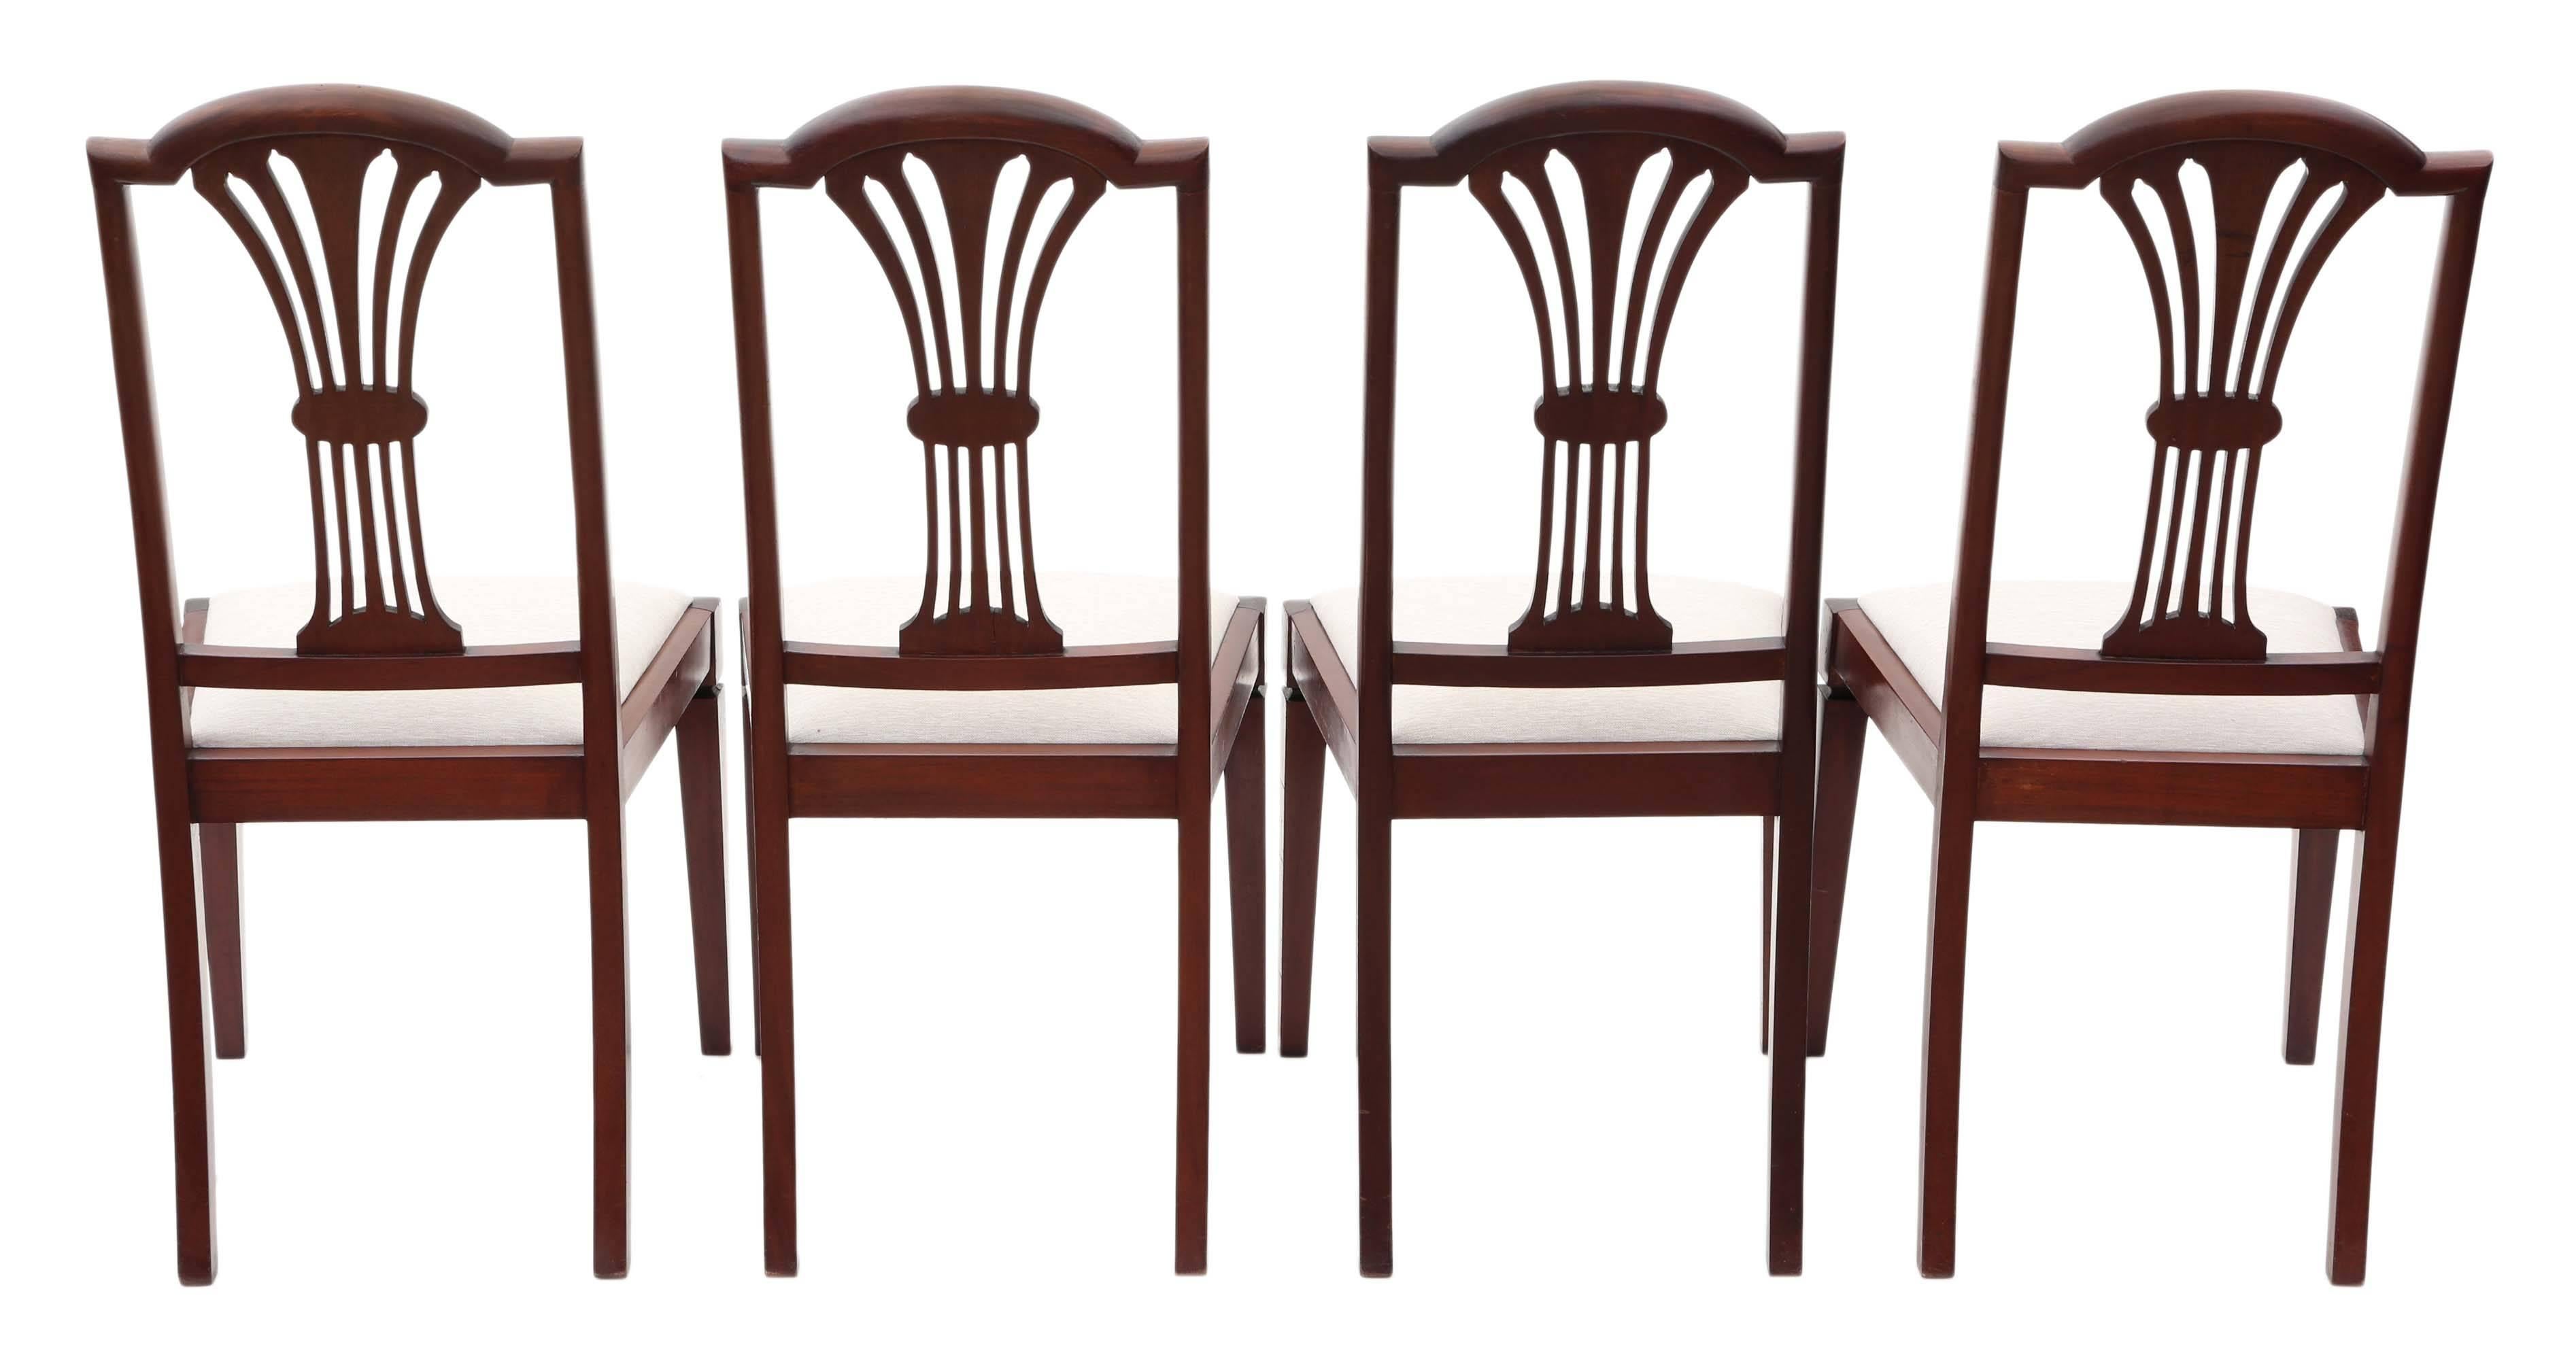 Antique quality set of four Edwardian mahogany high back dining chairs, circa 1910.

Fantastic age, color and patina. Great styling.

Solid and strong with no loose joints. Full of age, charm and character, a rare find. No woodworm.

Good new